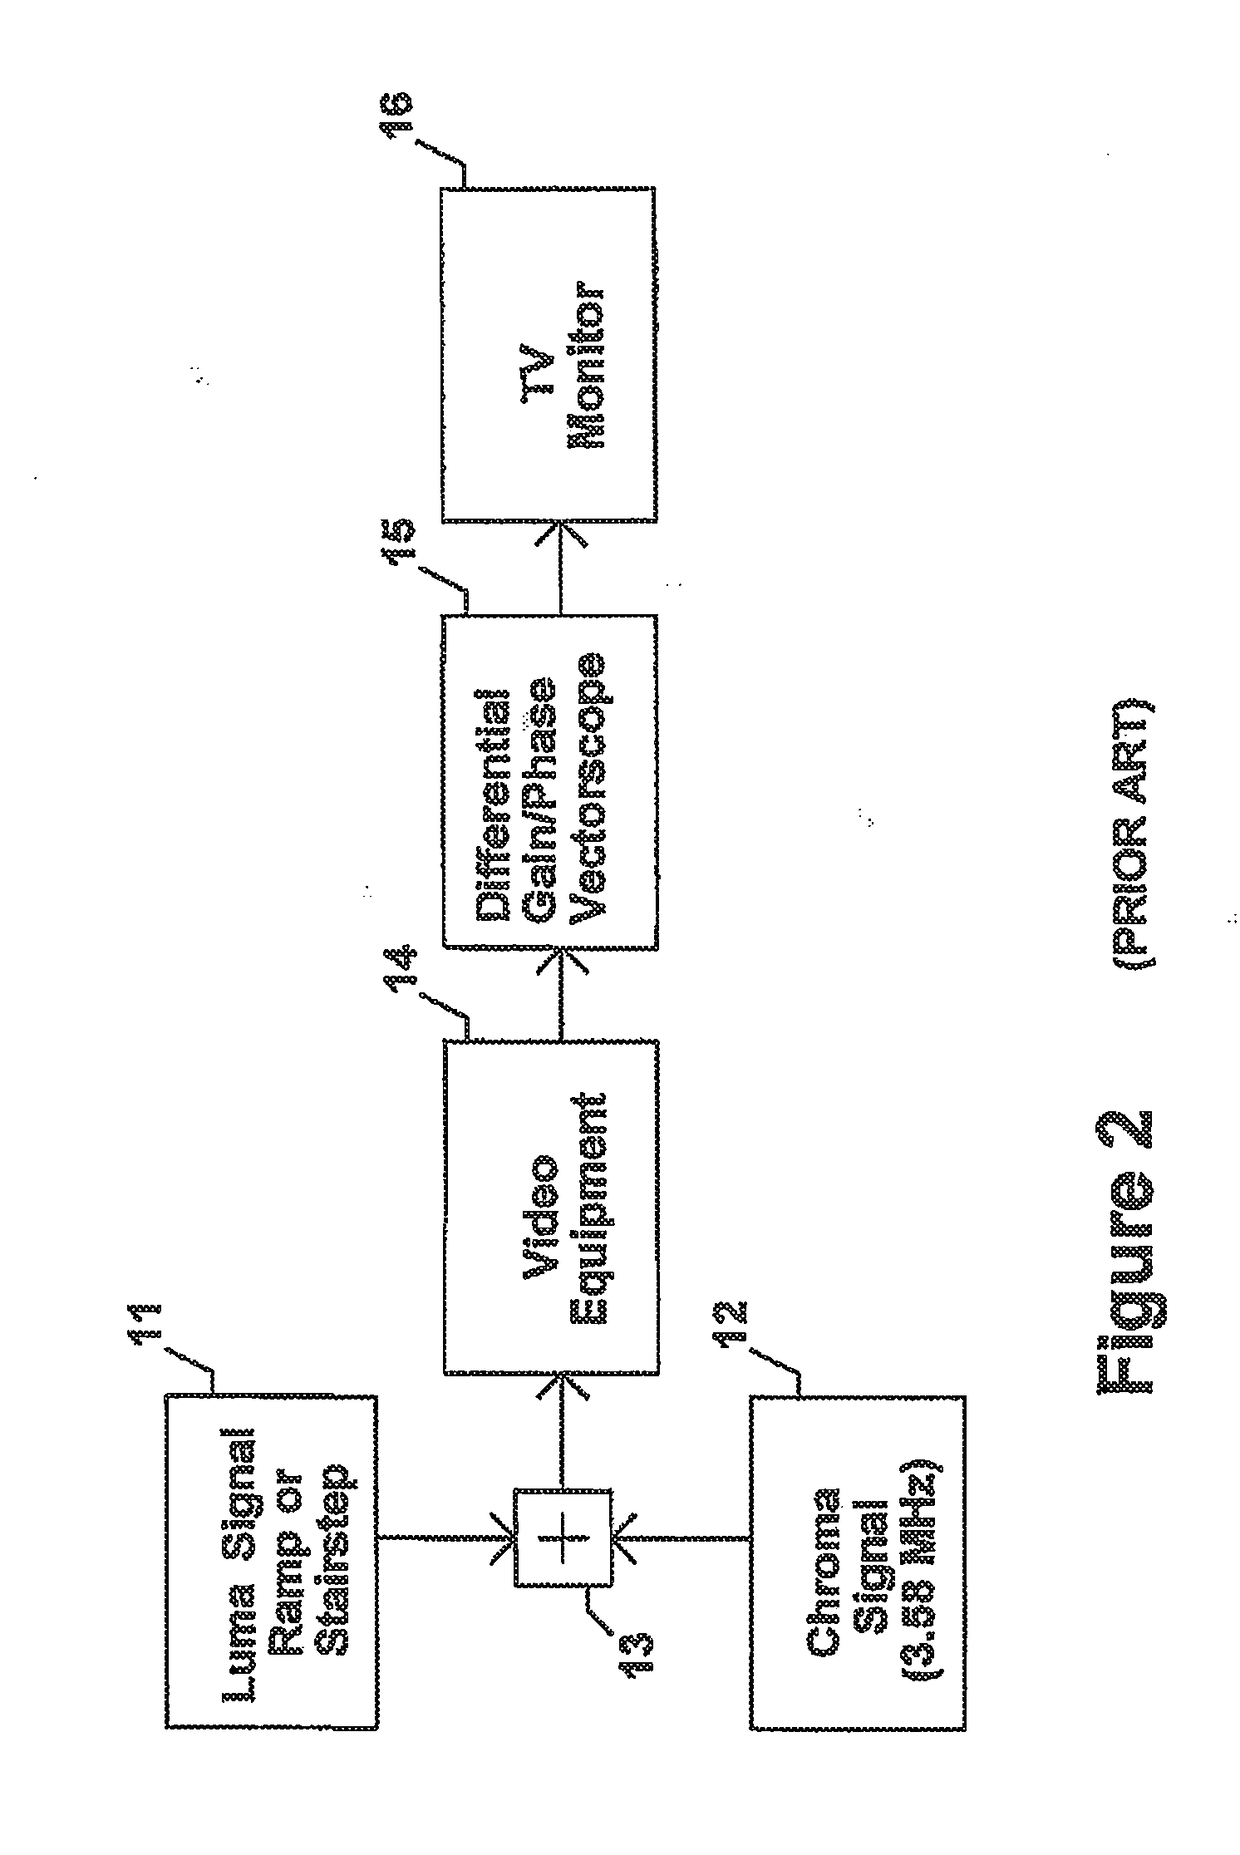 Method and apparatus to evaluate audio equipment for dynamic distortions and or differential phase and or frequency modulation effects